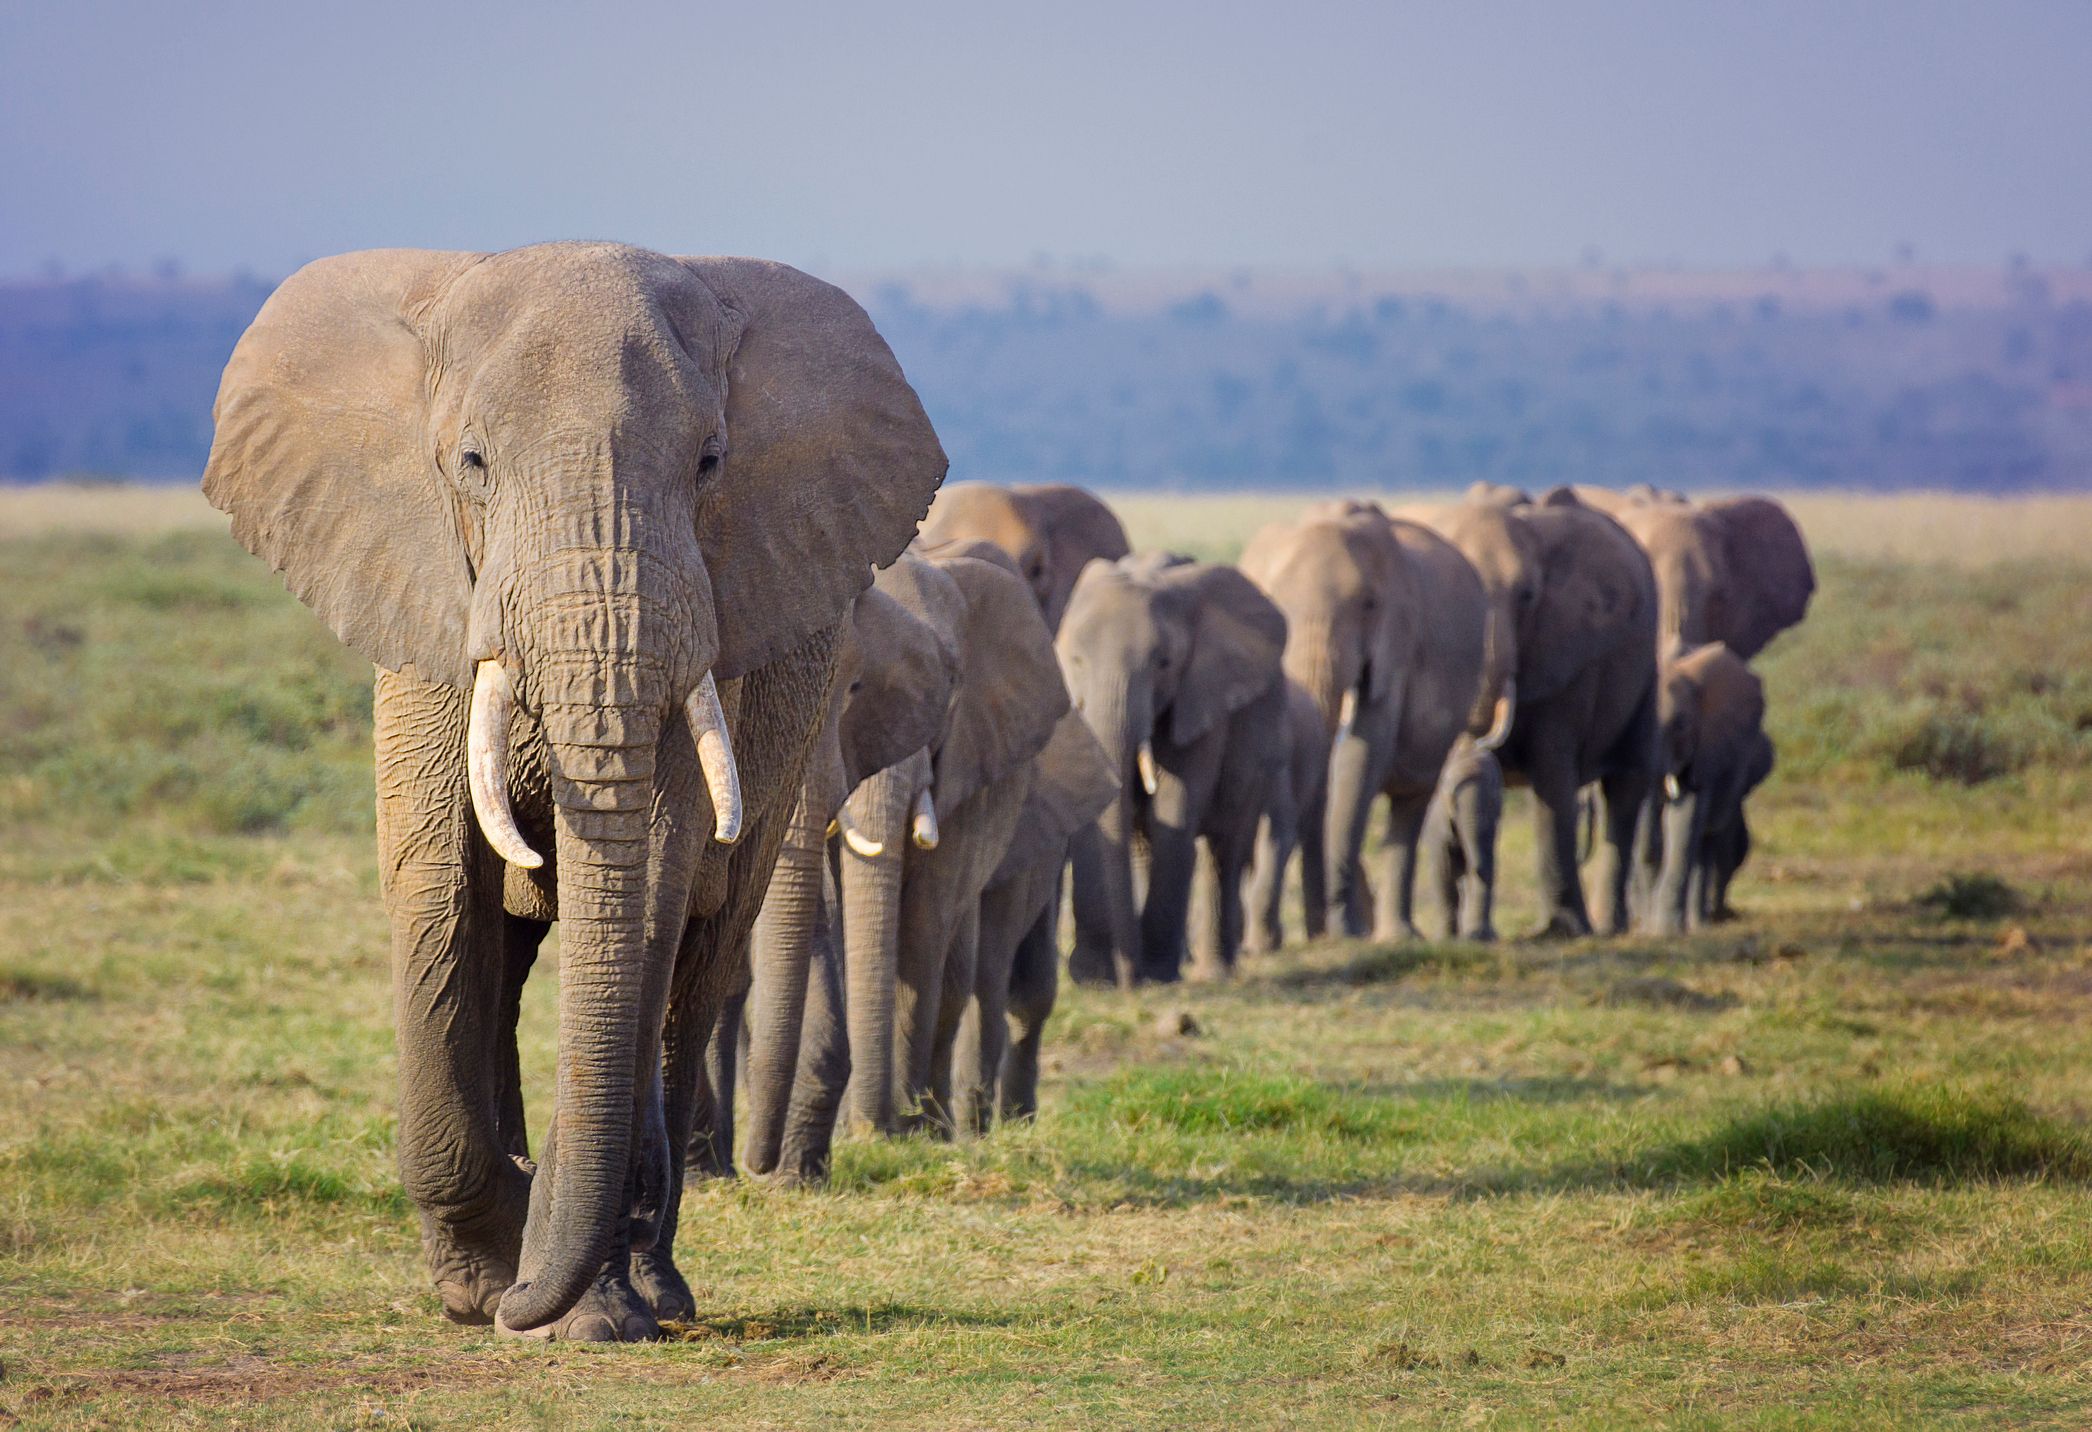 Amazing Line of Elephant Family Marching in Order at Amboseli, Kenya. | Foto: Stock Fotografie via Getty Images